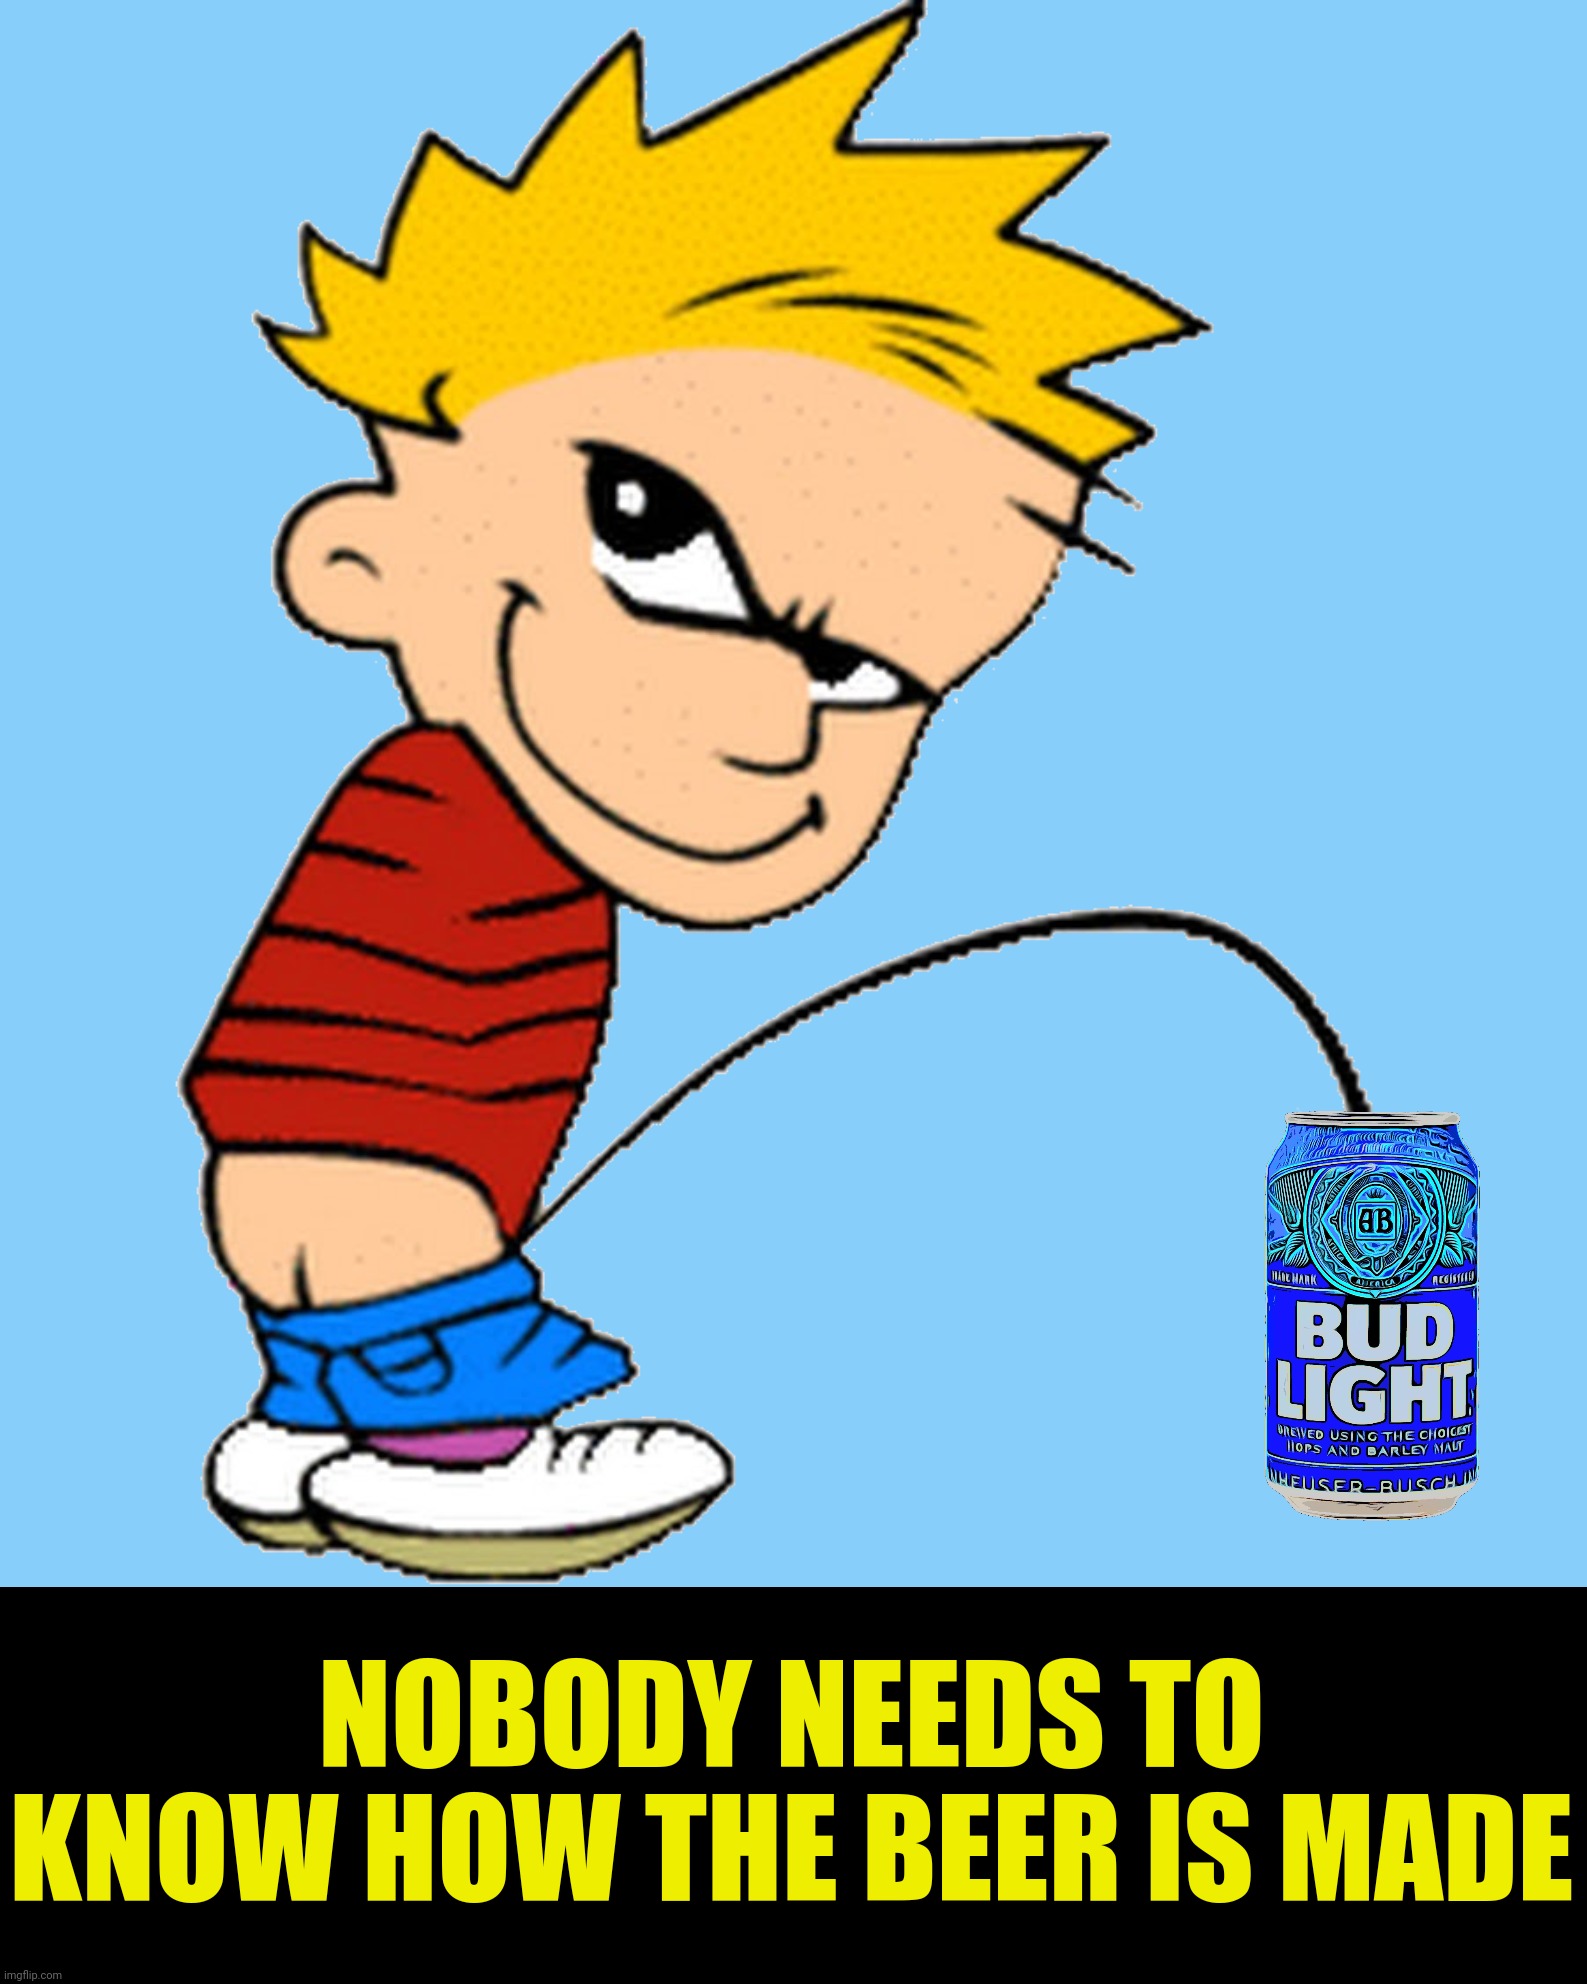 NOBODY NEEDS TO KNOW HOW THE BEER IS MADE | made w/ Imgflip meme maker